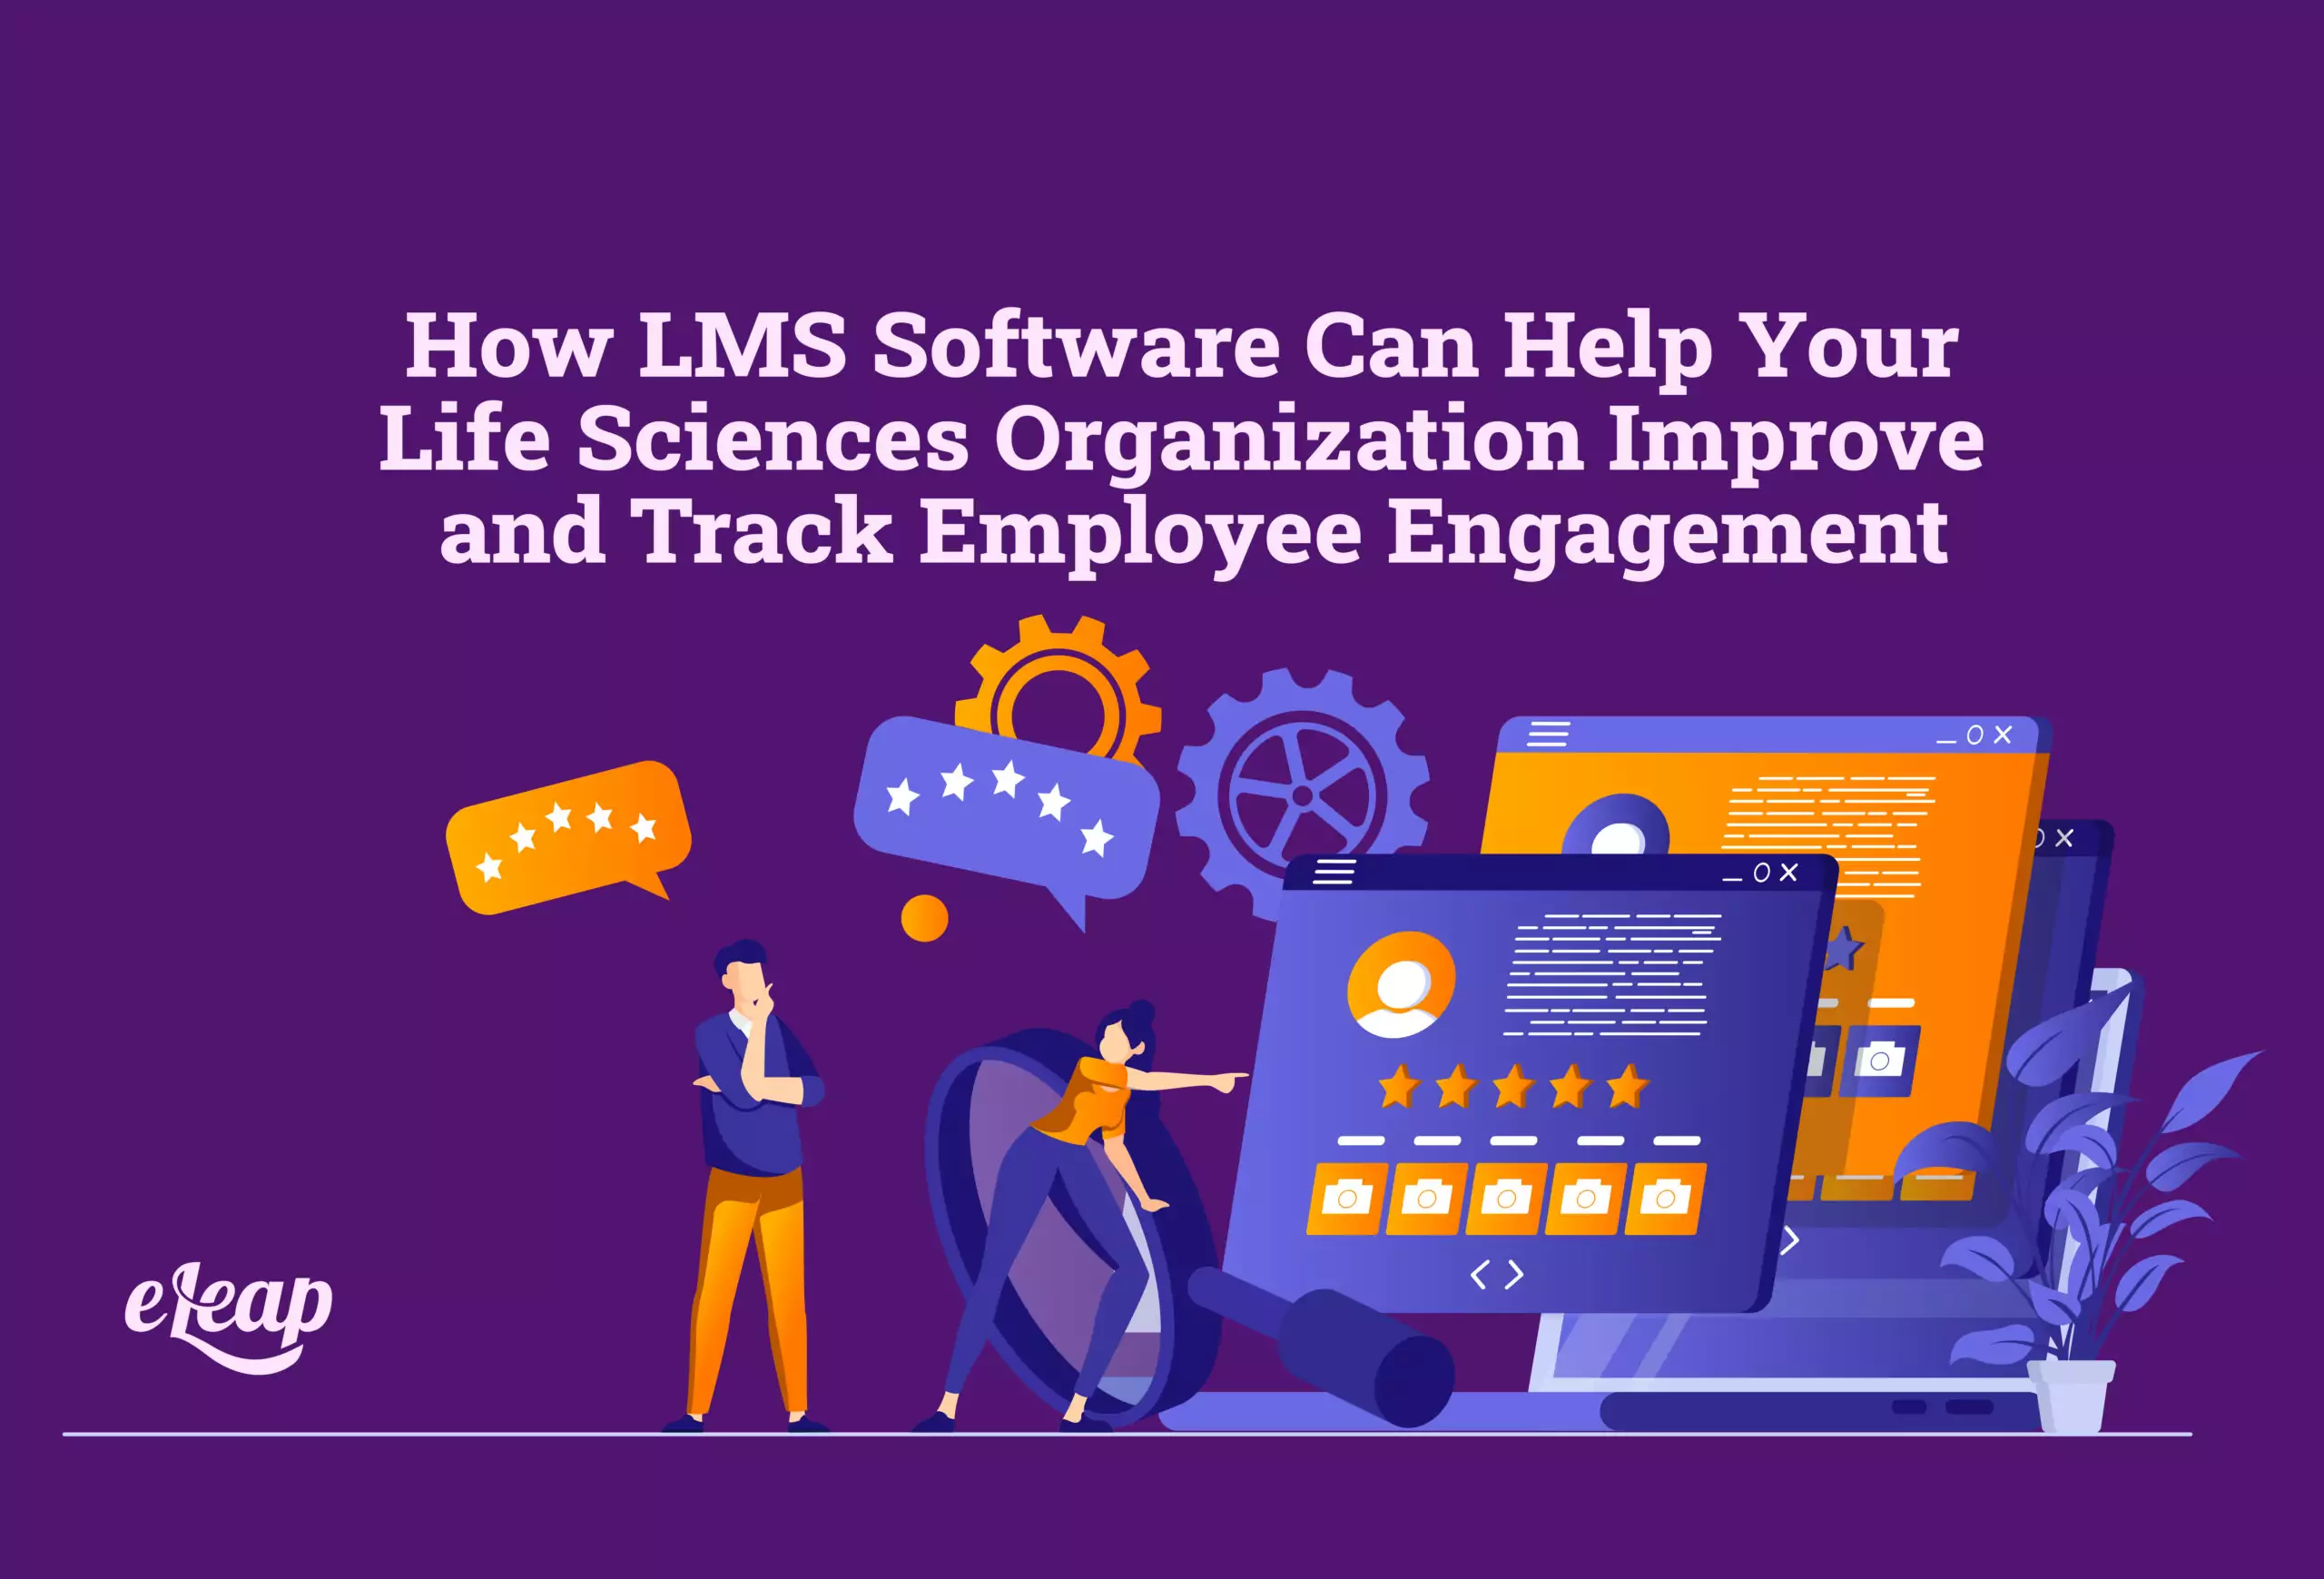 How LMS Software Can Help Your Life Sciences Organization Improve and Track Employee Engagement